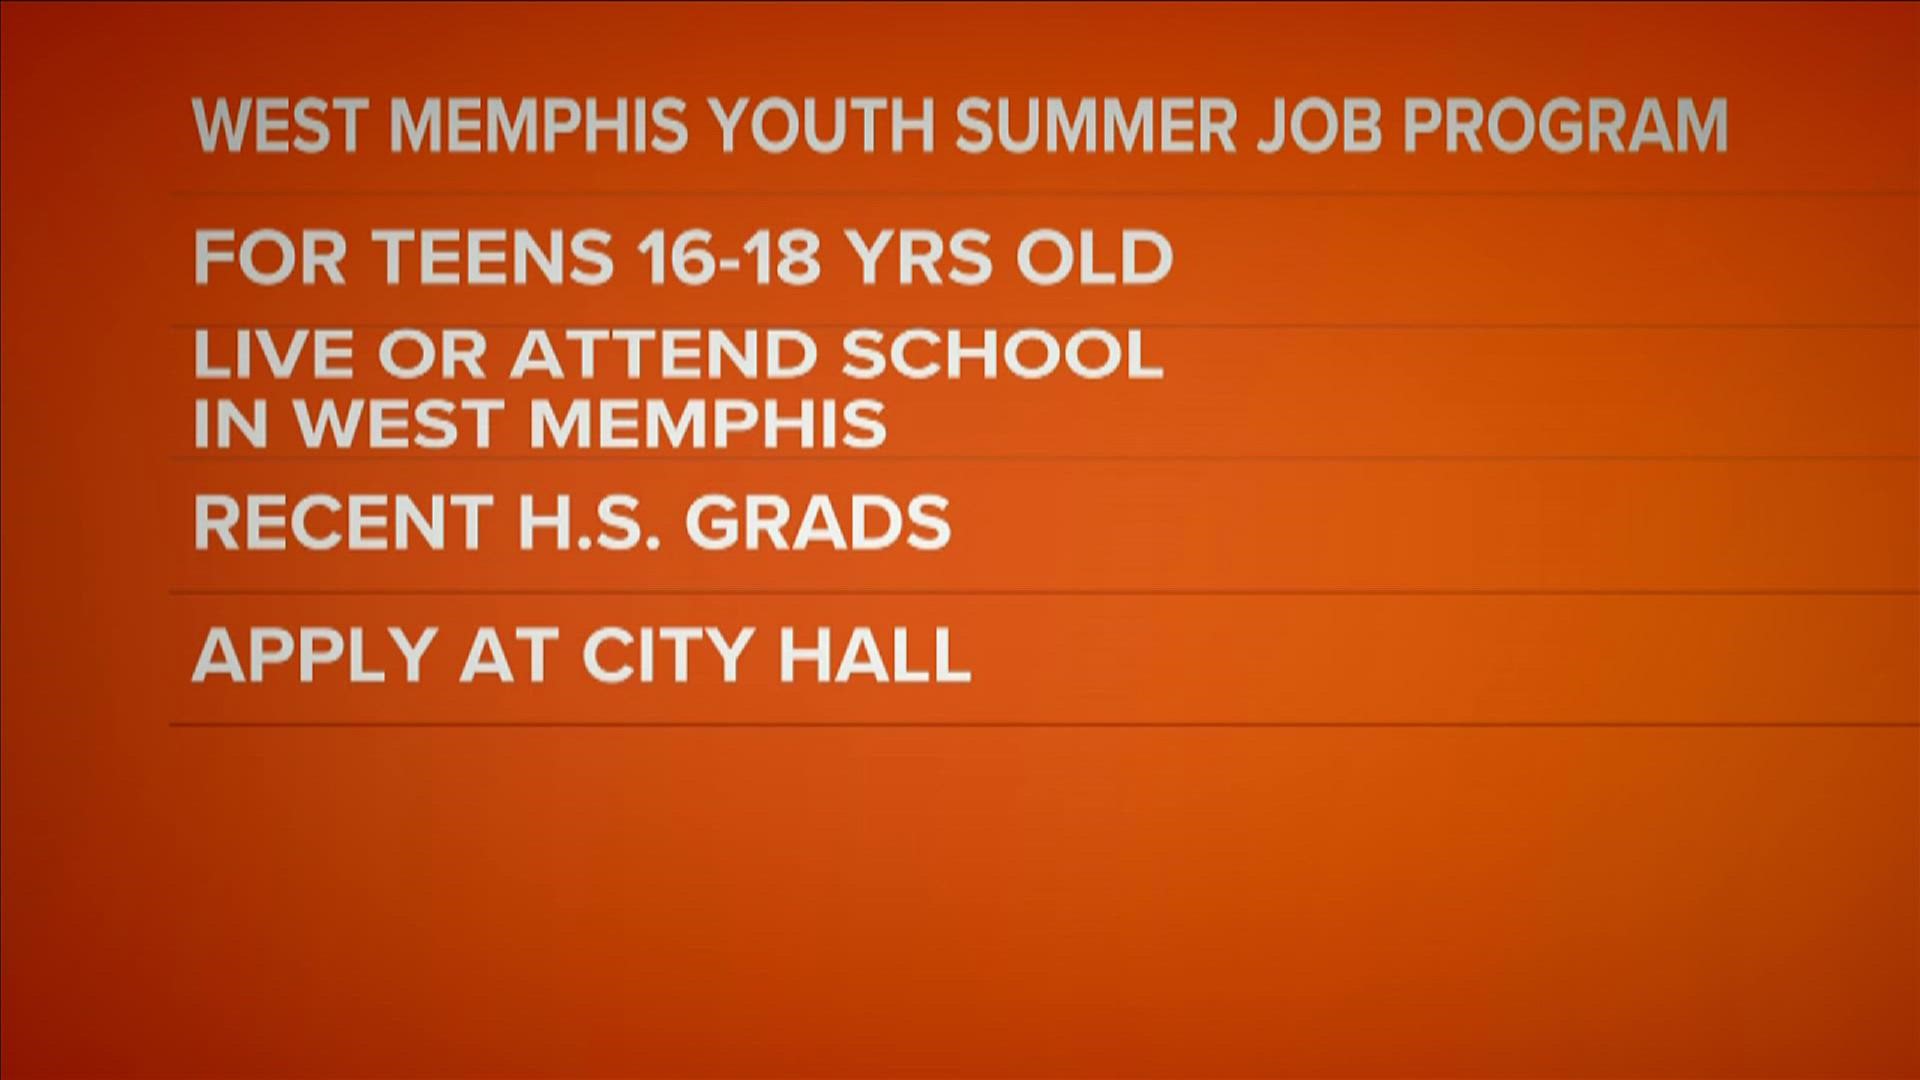 It's a six-week program for teens 16 to 18-years-old. They must live in West Memphis or attend school there.